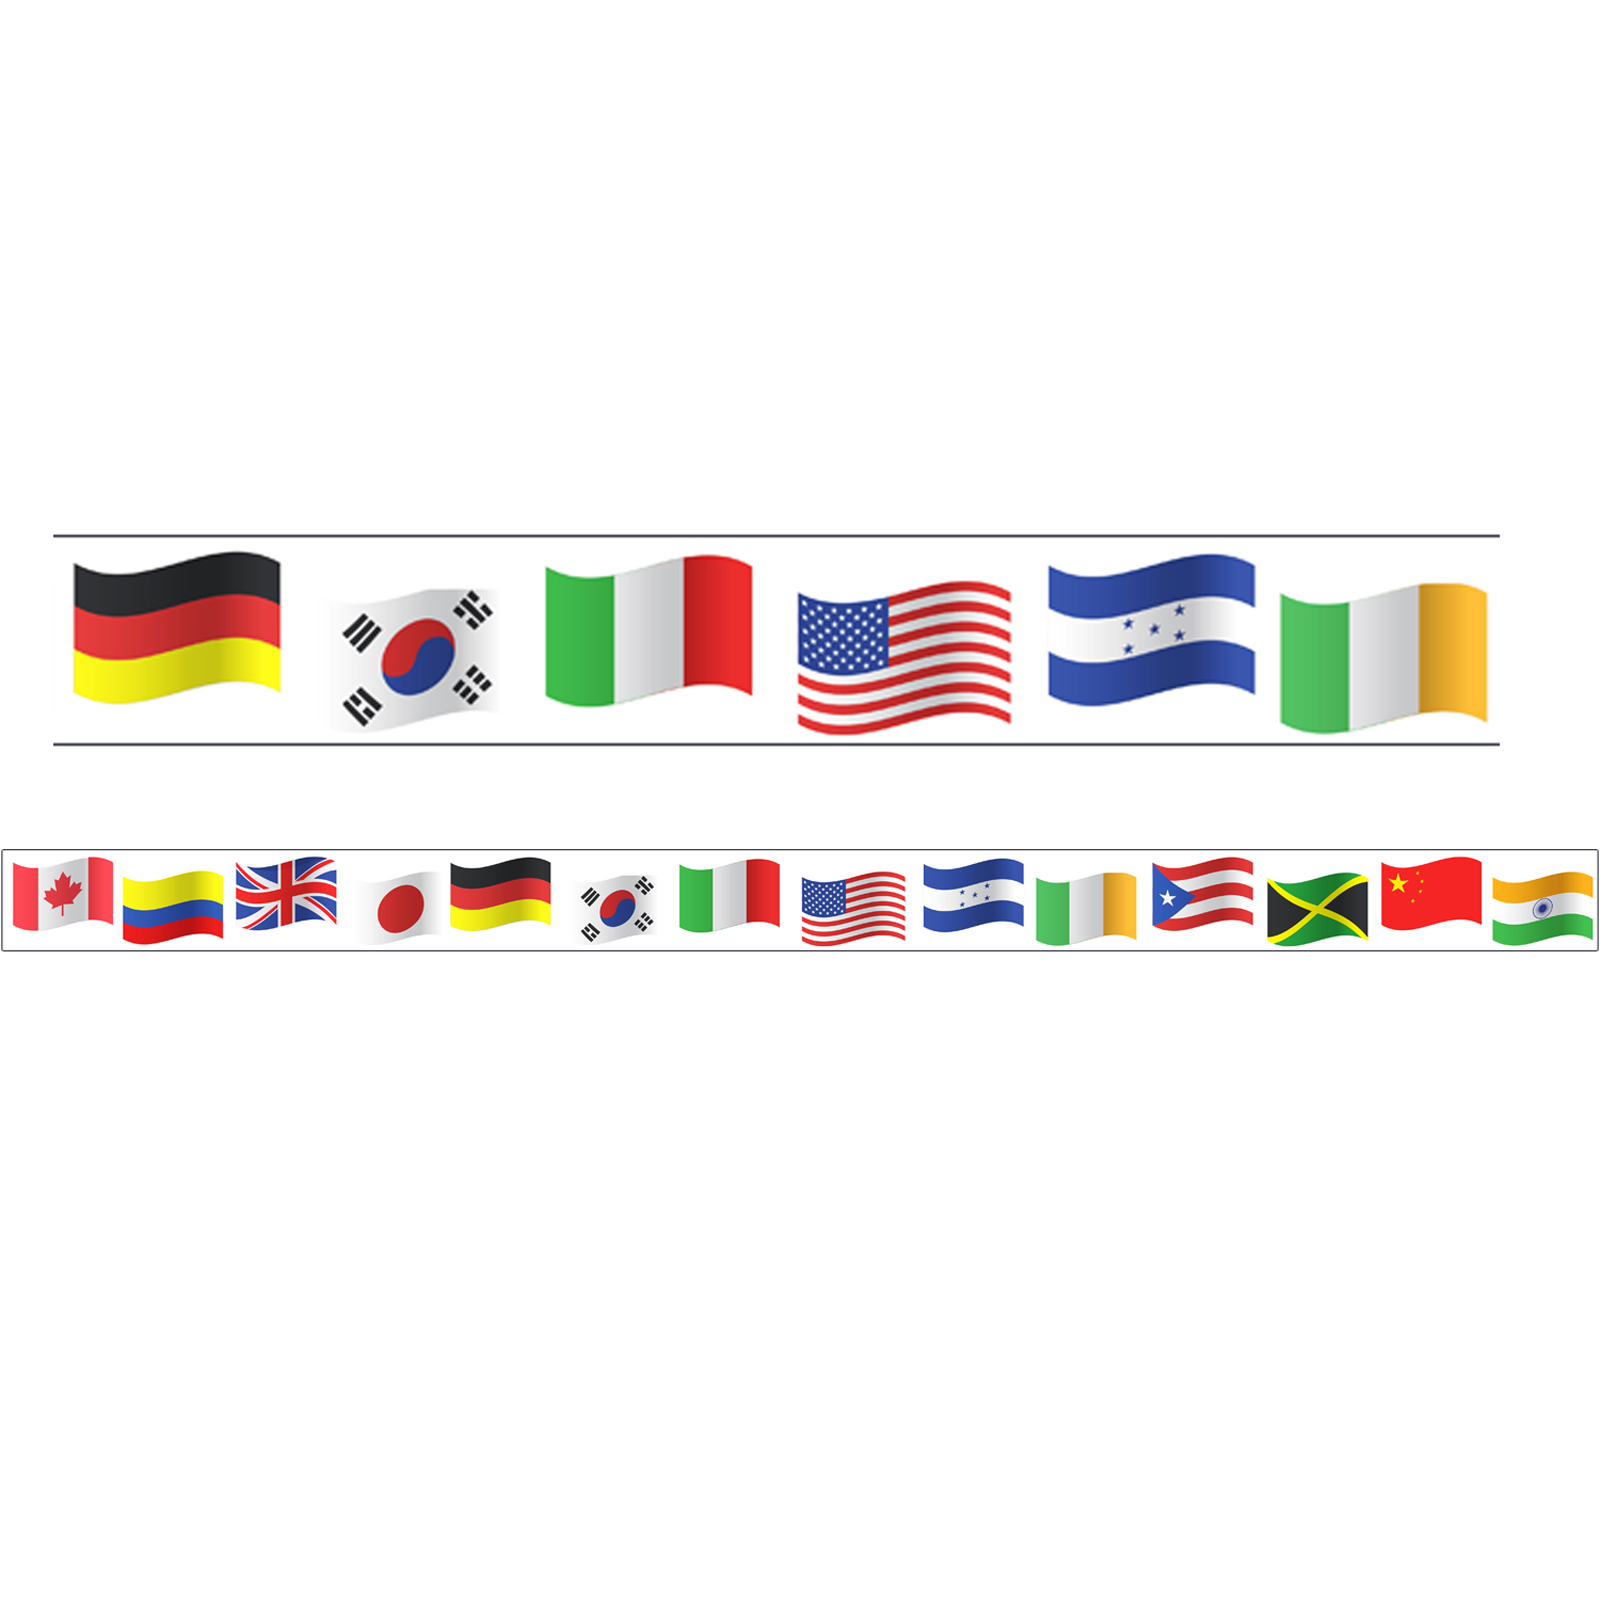 Magnetic Straight Borders/Trims, 1.5" x 24", World Flags Theme, Pack of 12